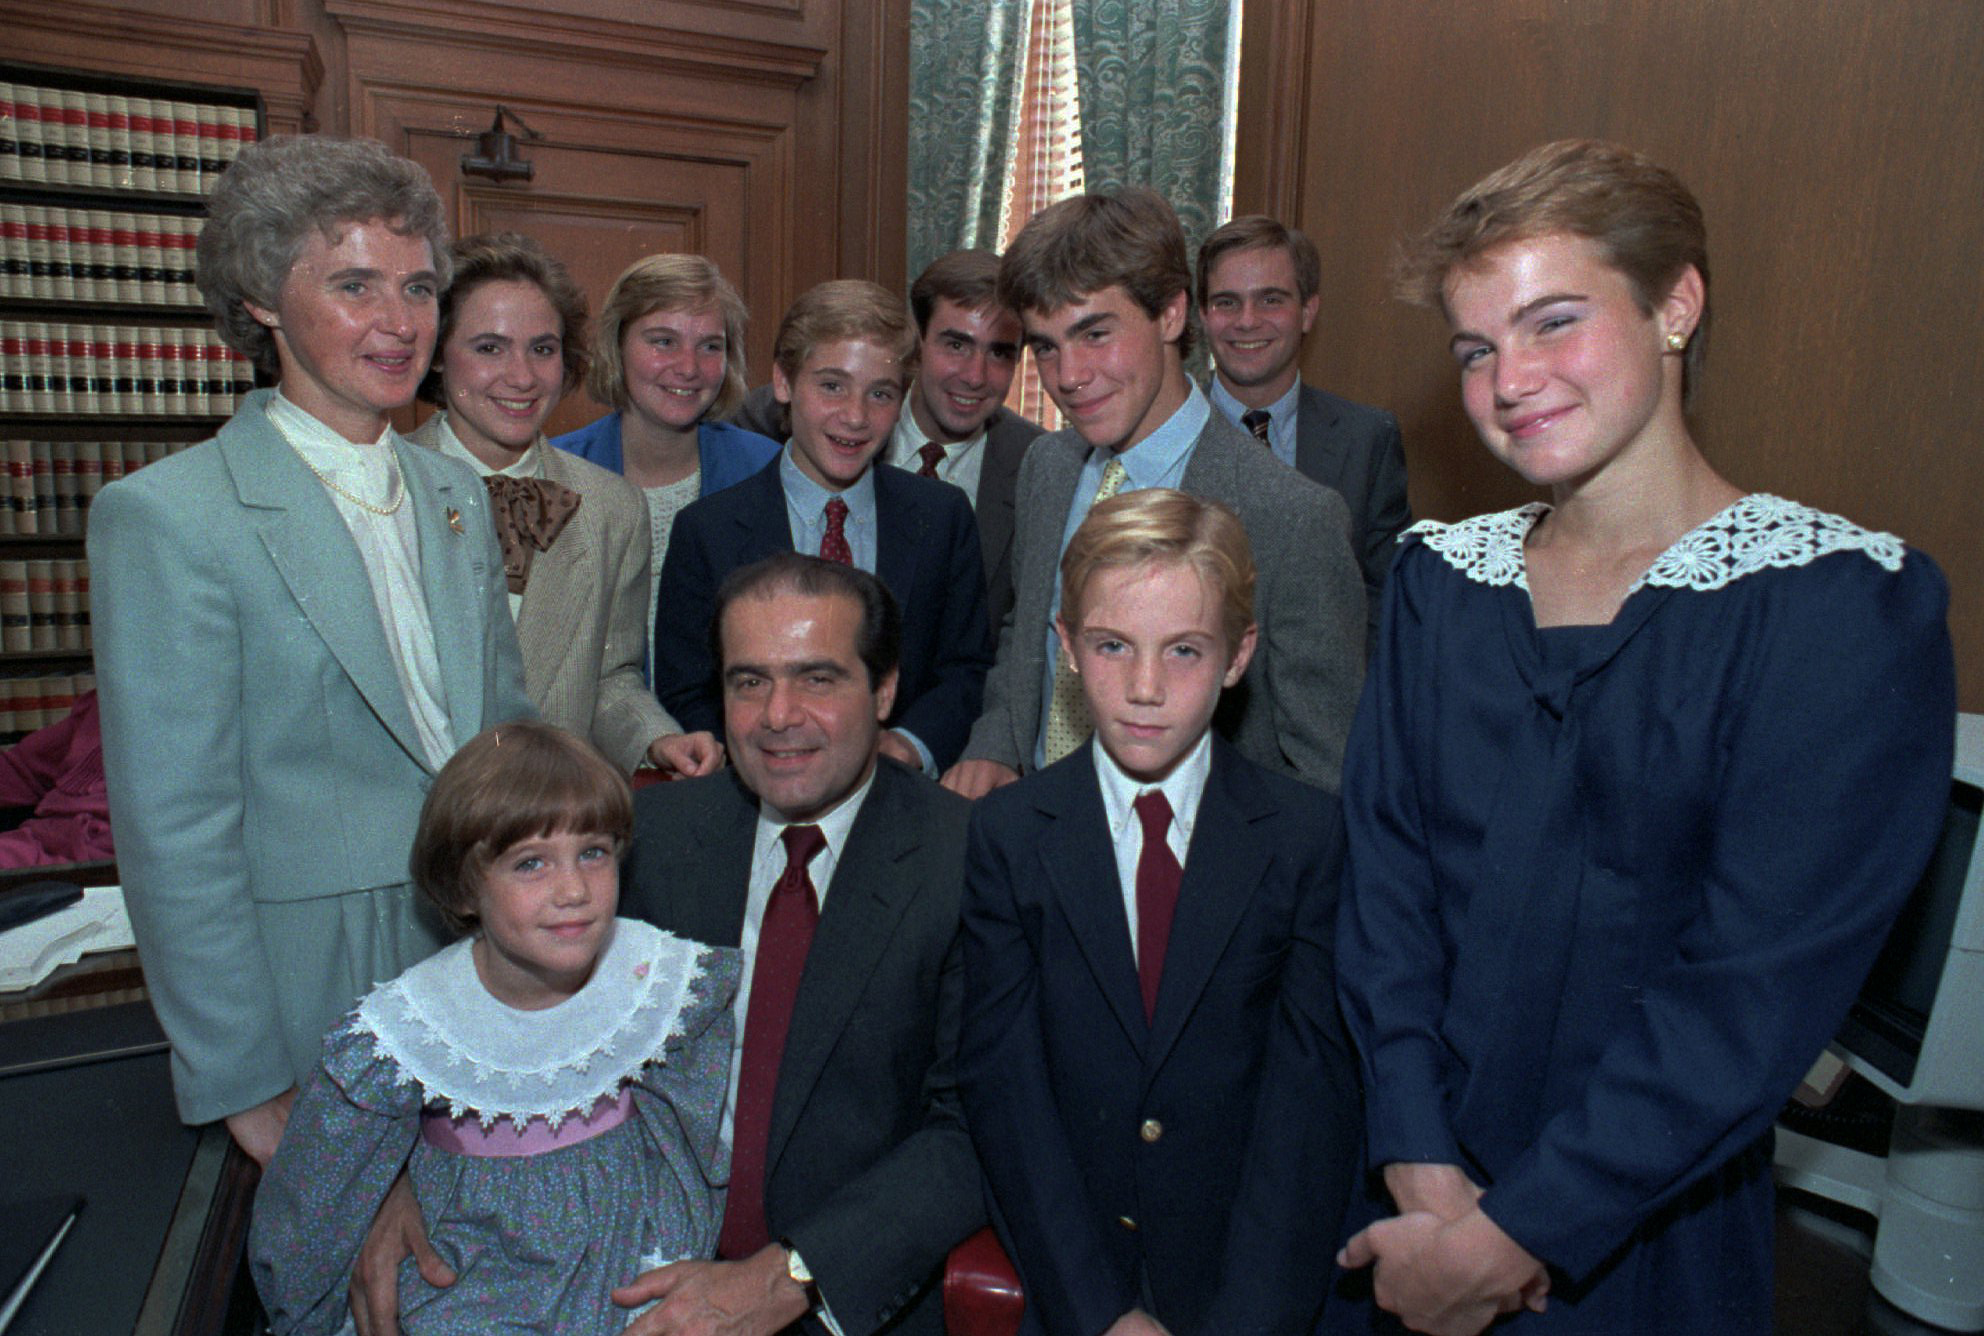 Antonin Scalia poses with his family in his chambers before court ceremonies on Sept. 26, 1986 in Washington, D.C. (Bob Daugherty—AP)